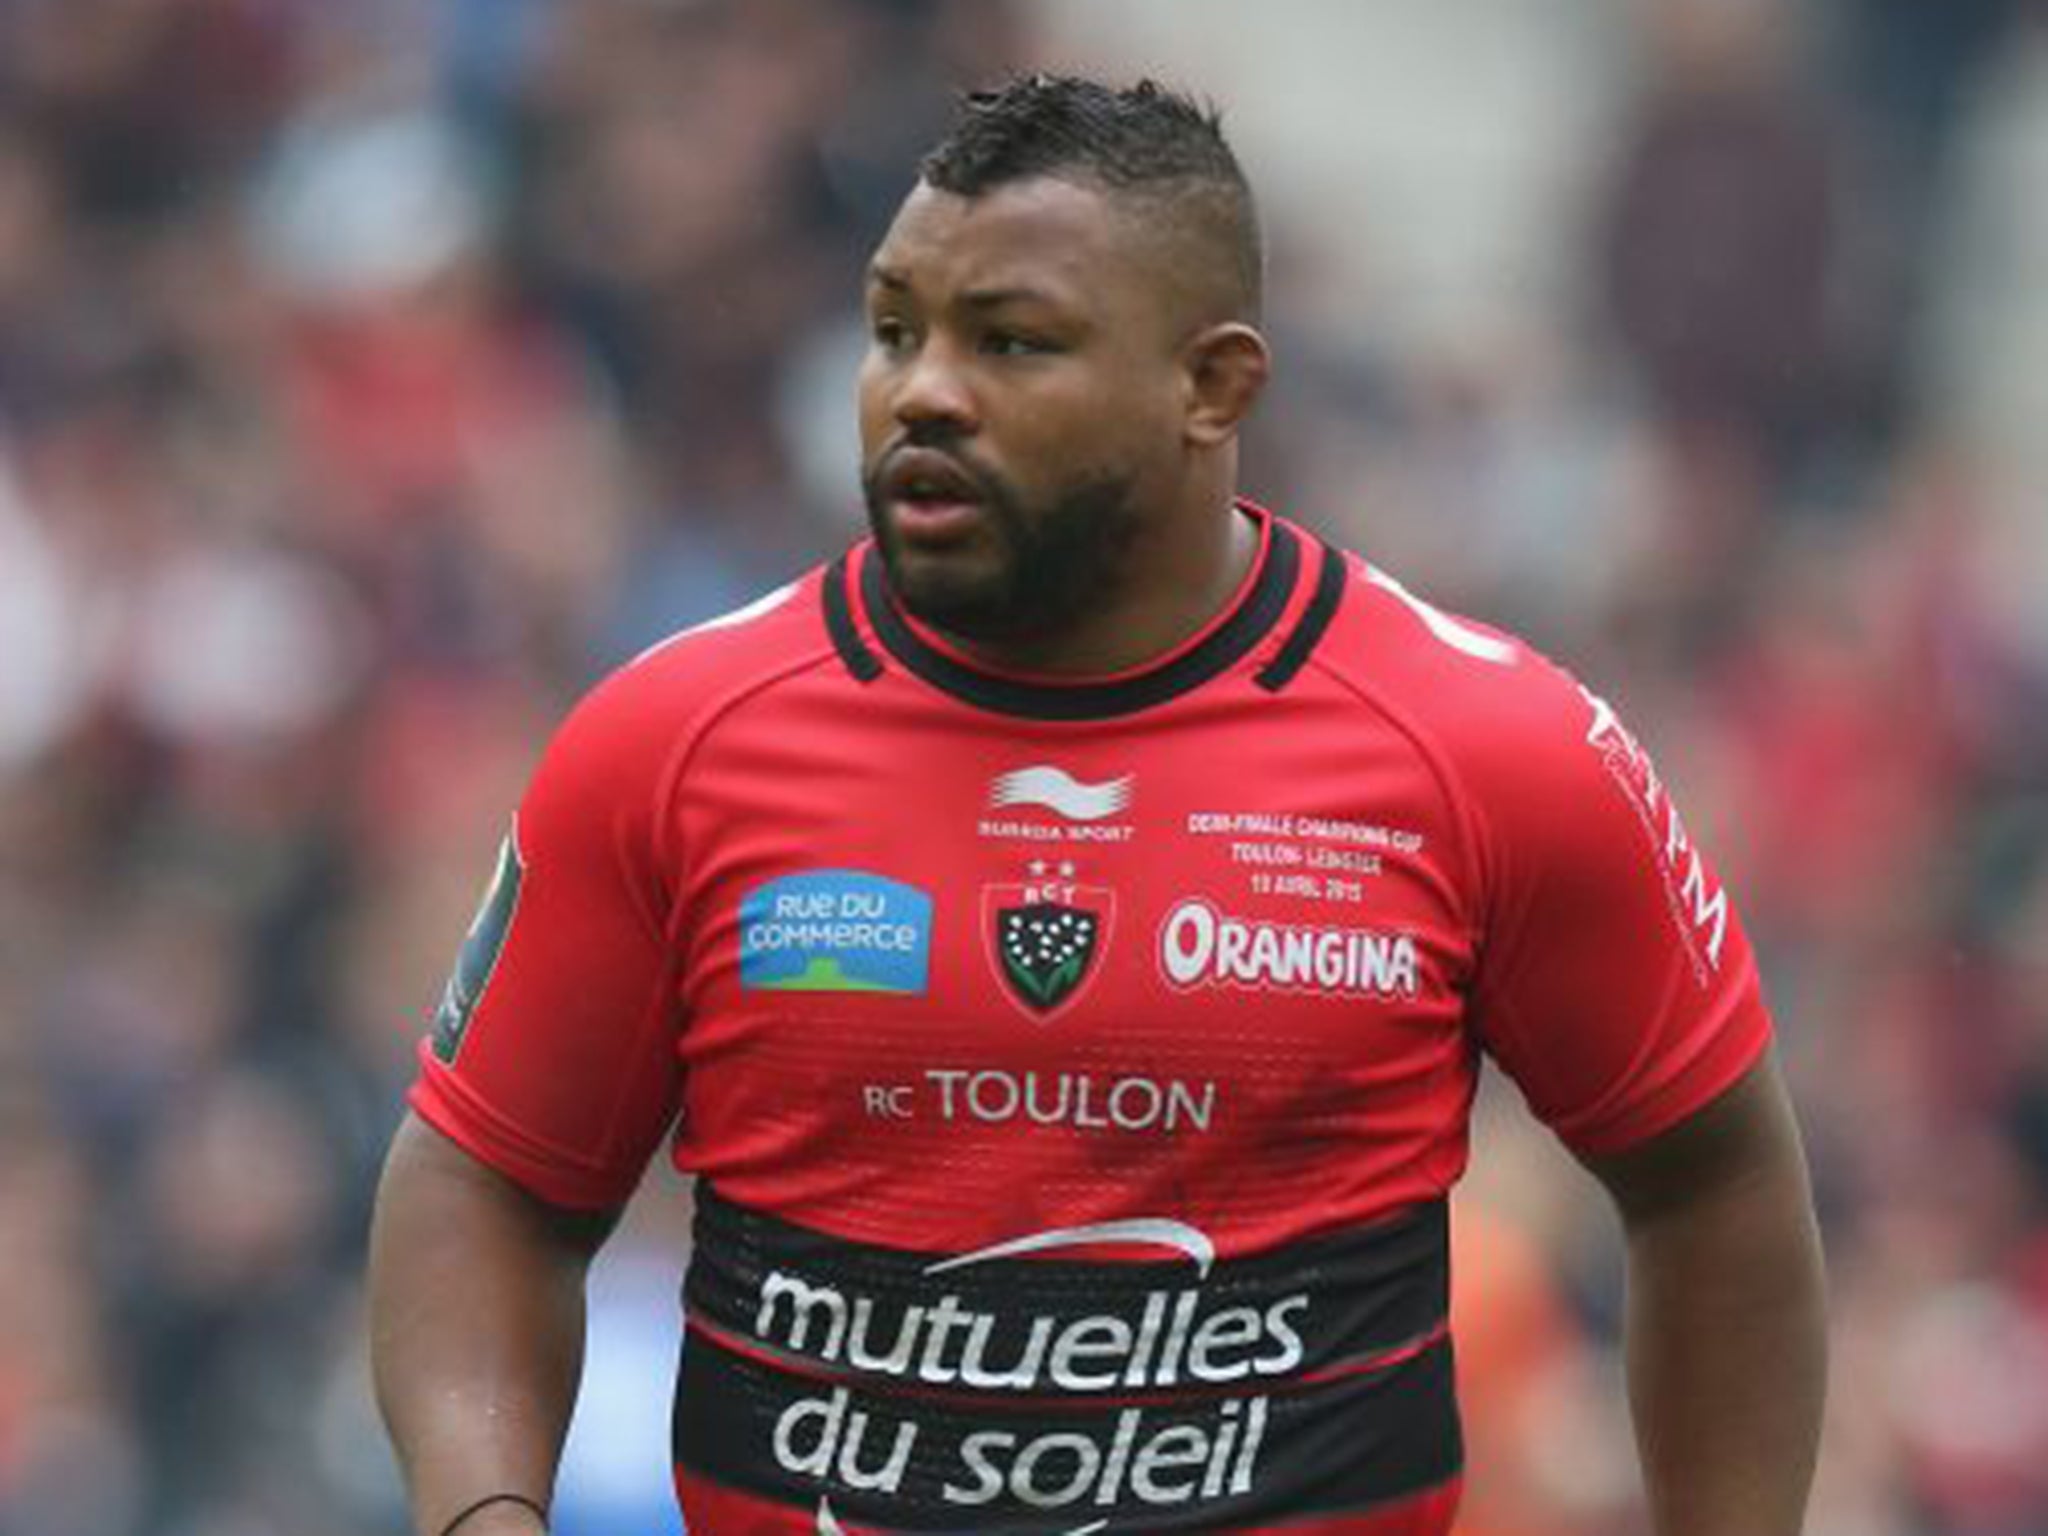 Steffon Armitage scored two tries as Toulon won 24-9 at home to Leinster in the Champions Cup